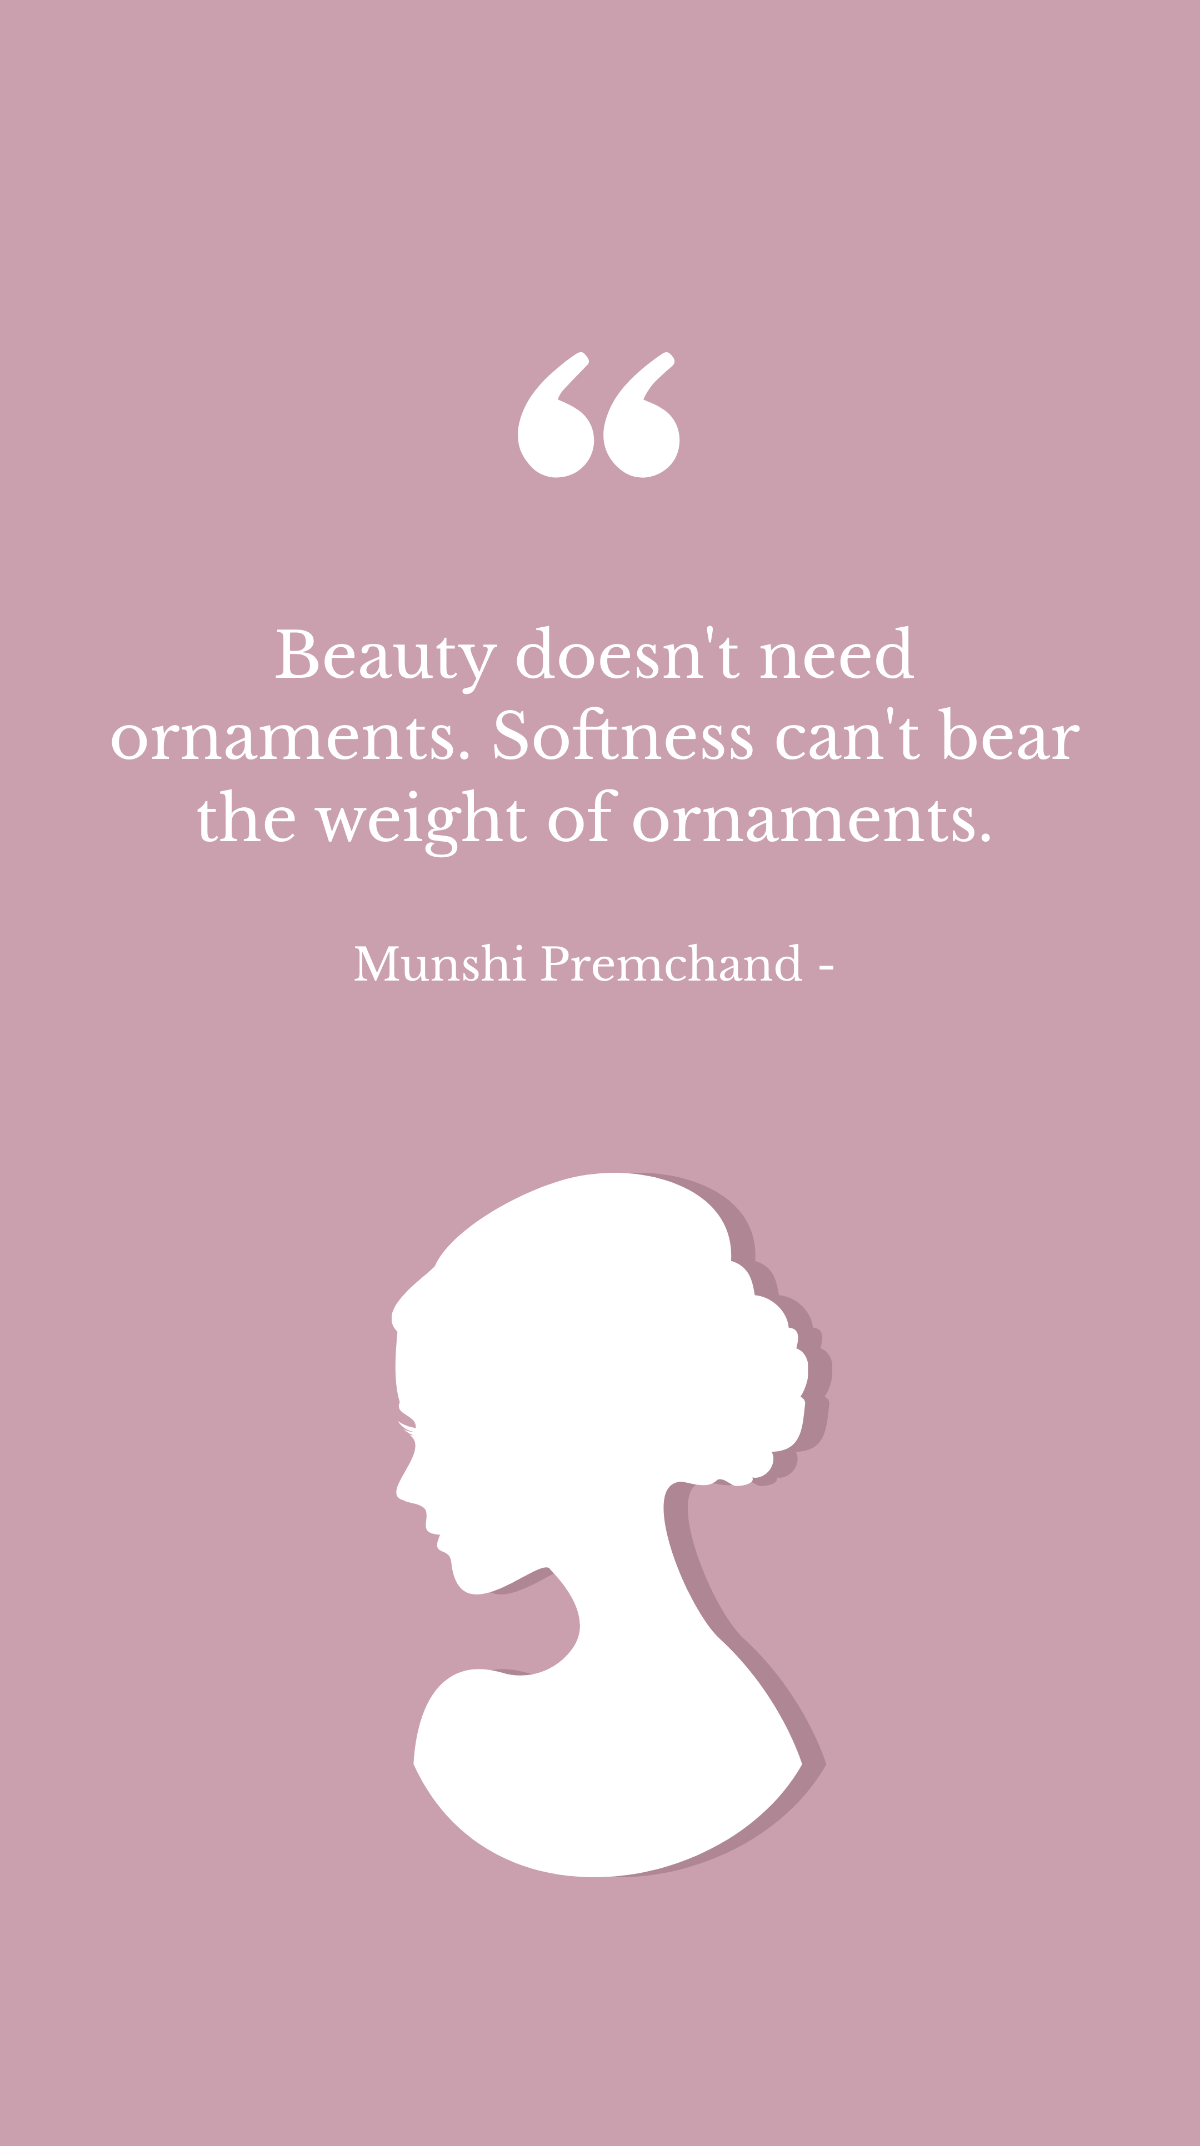 Munshi Premchand - Beauty doesn't need ornaments. Softness can't bear the weight of ornaments. Template